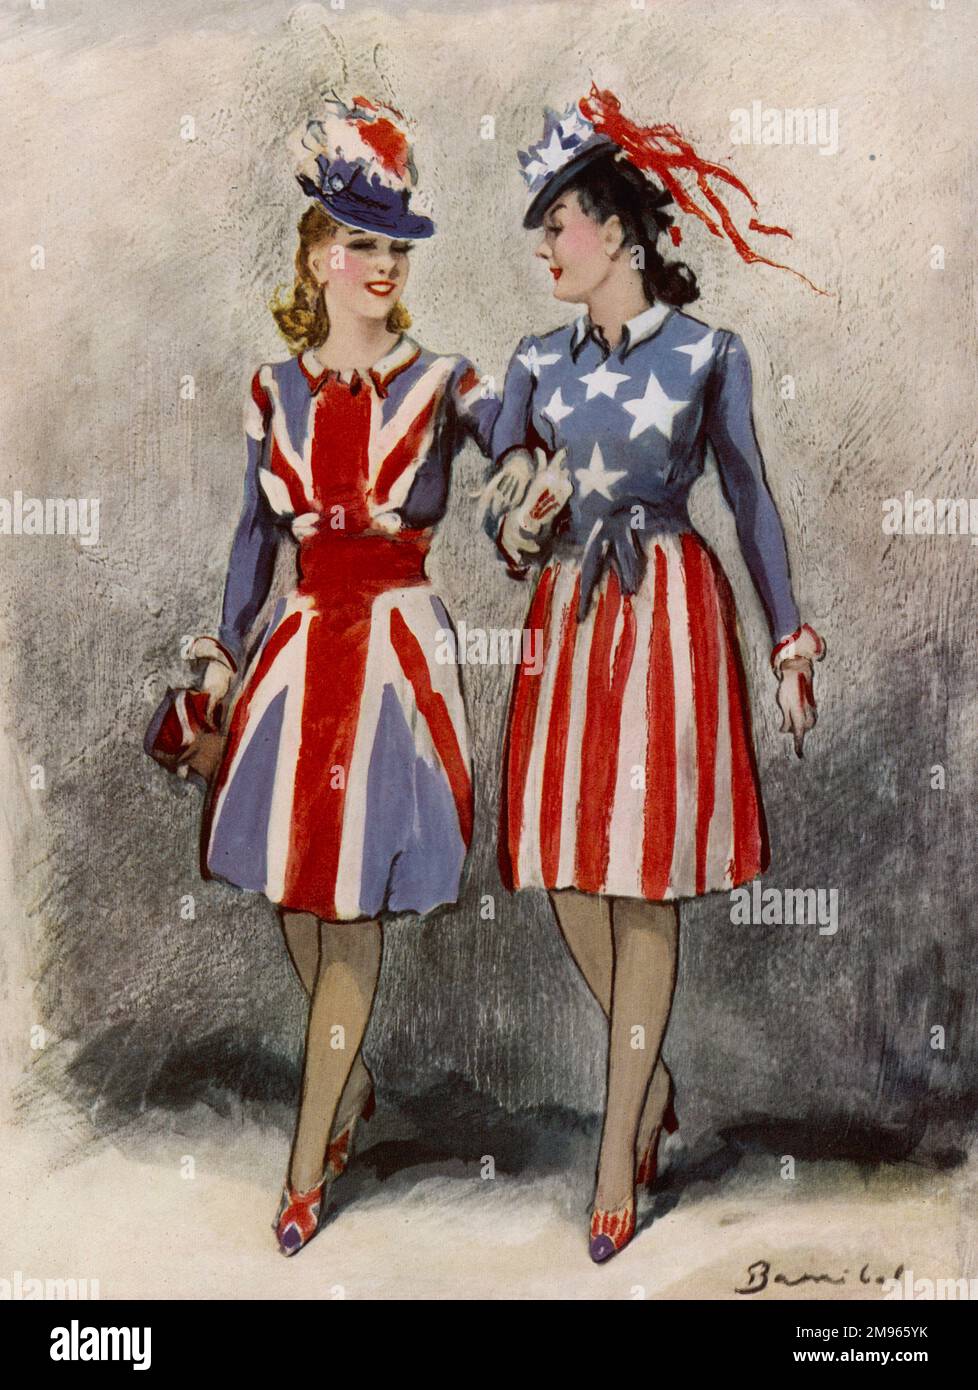 Two women, one British, one American, wearing suitably patriotic outfits. Stock Photo